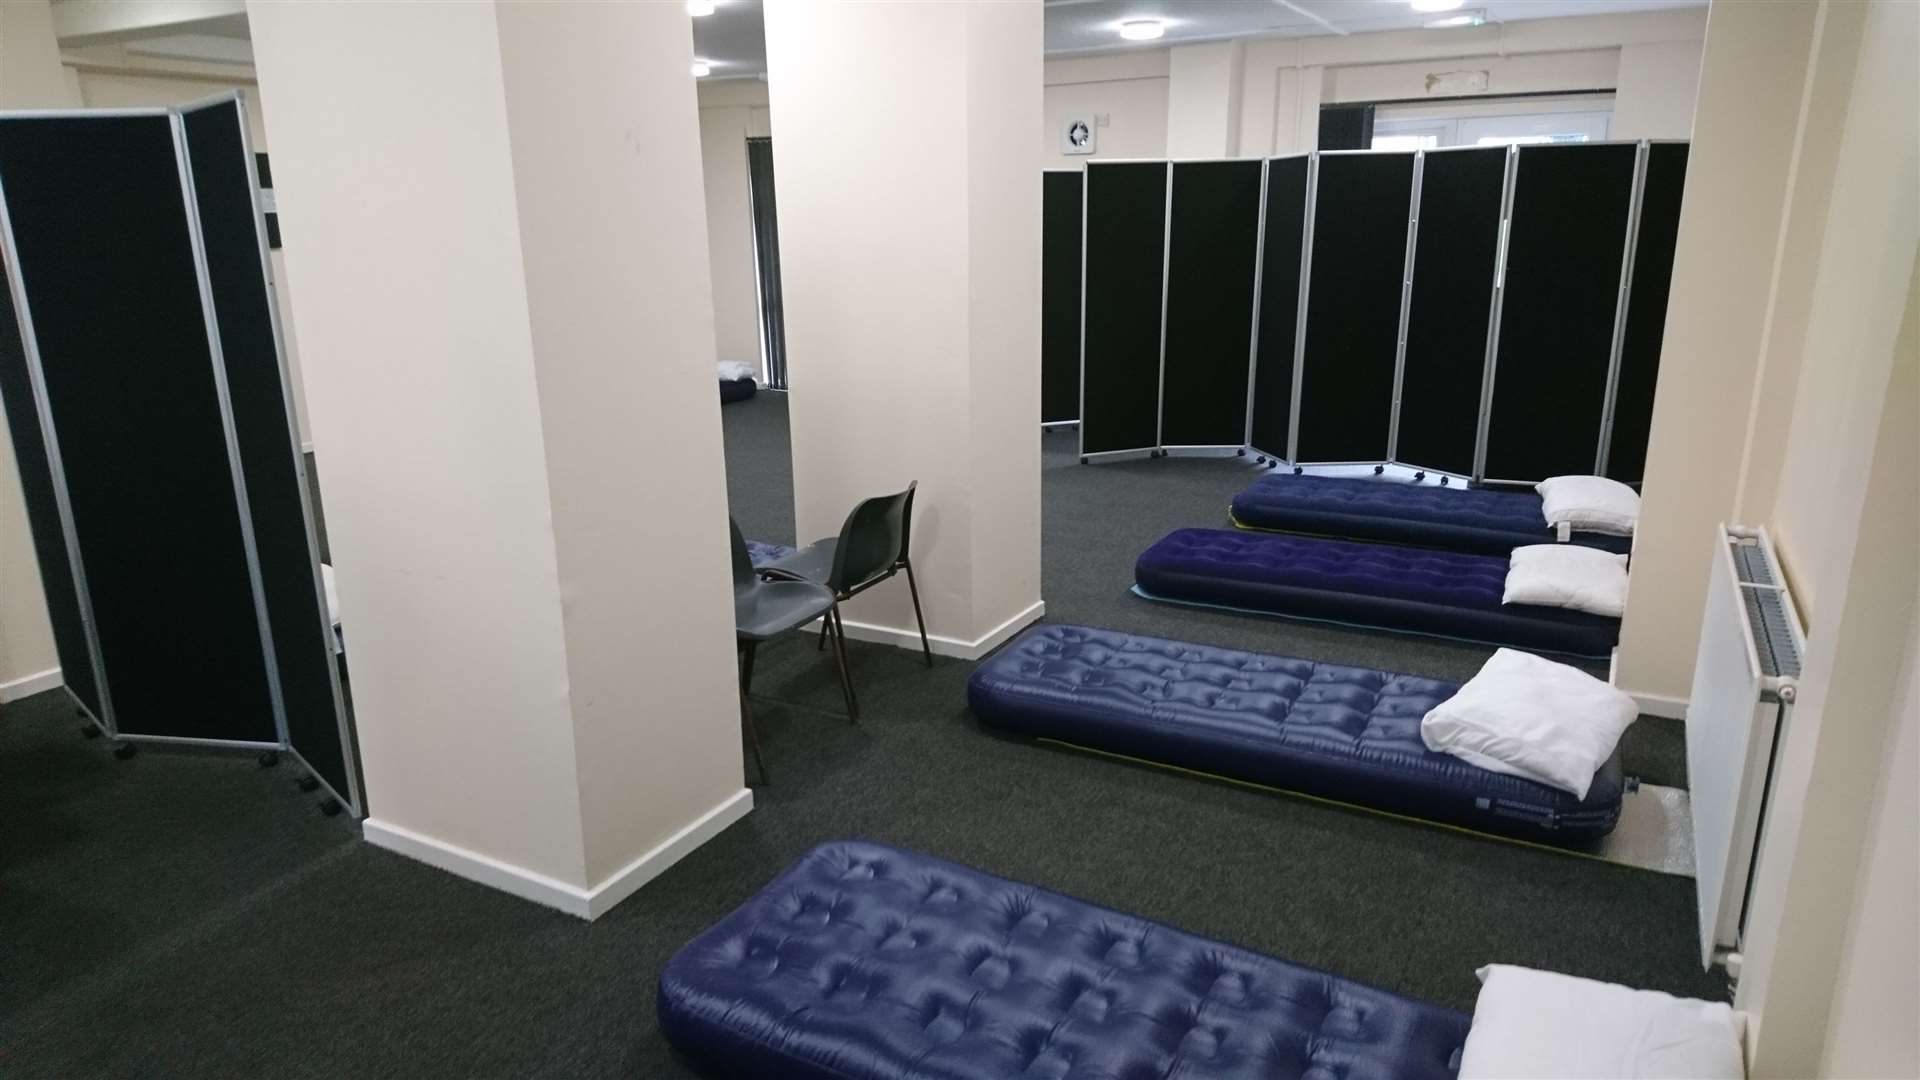 Gravesham Sanctuary has successfully raised enough money to replace the blow up beds it currently uses.